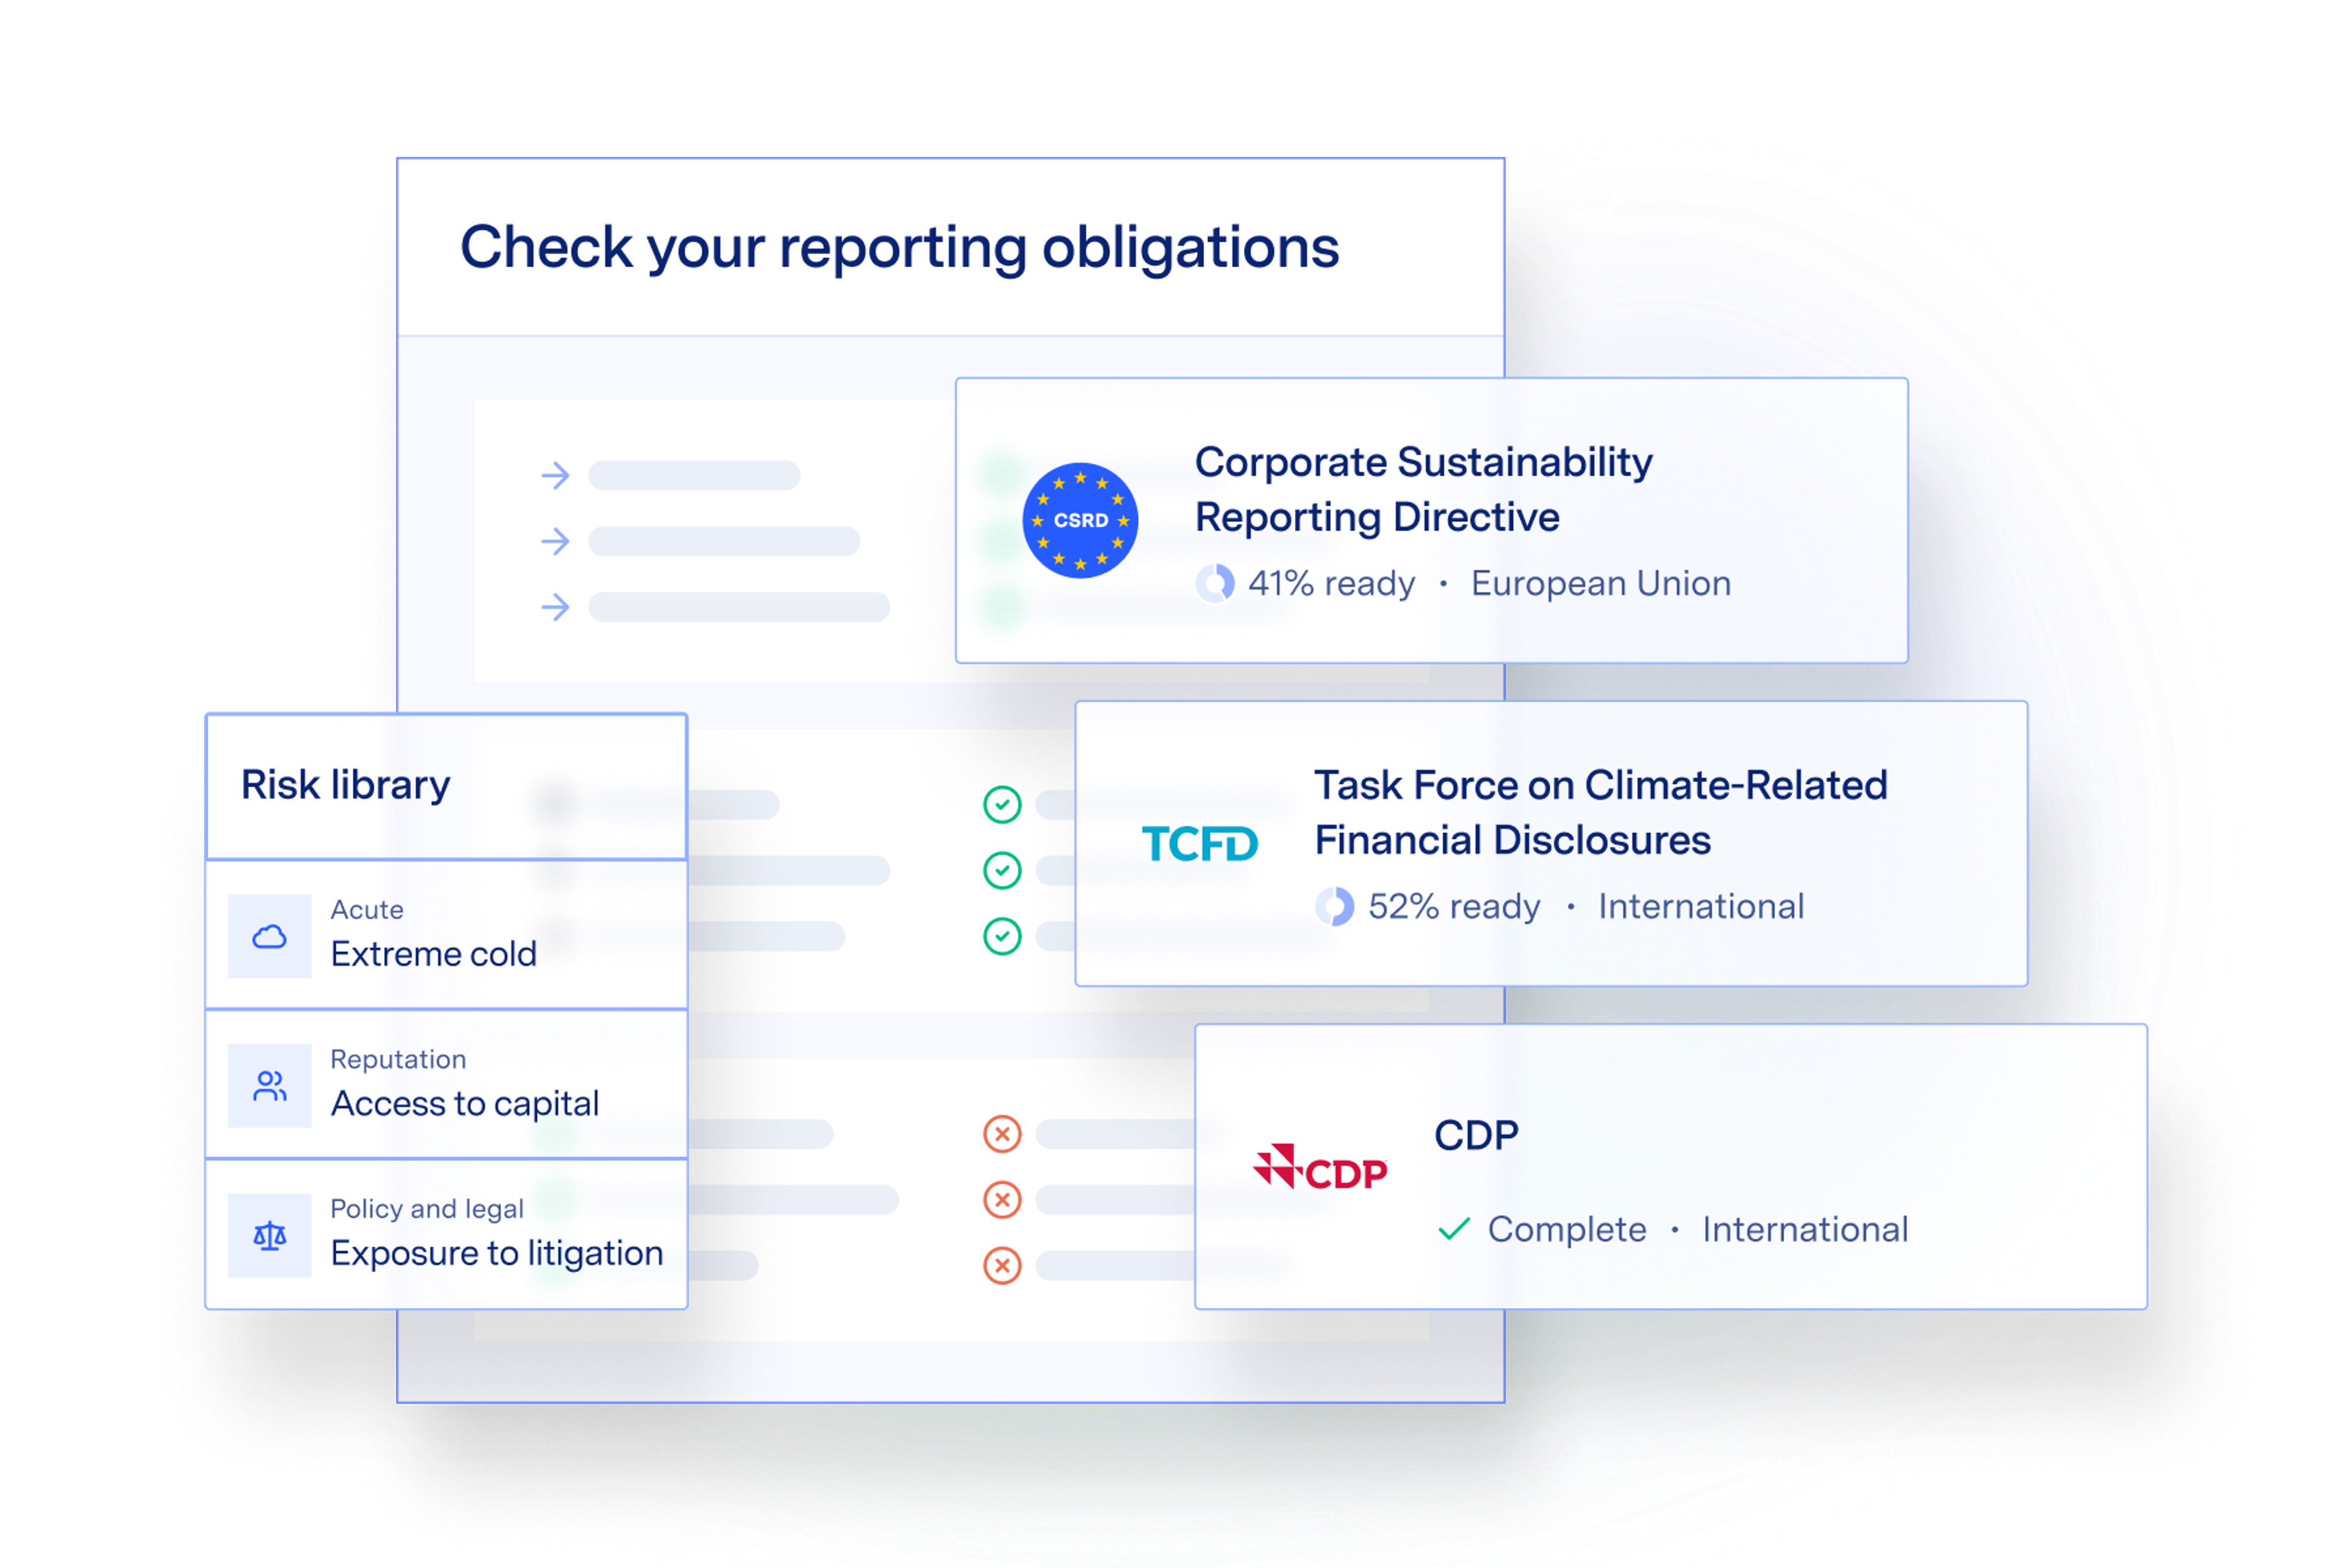 Check your reporting obligations